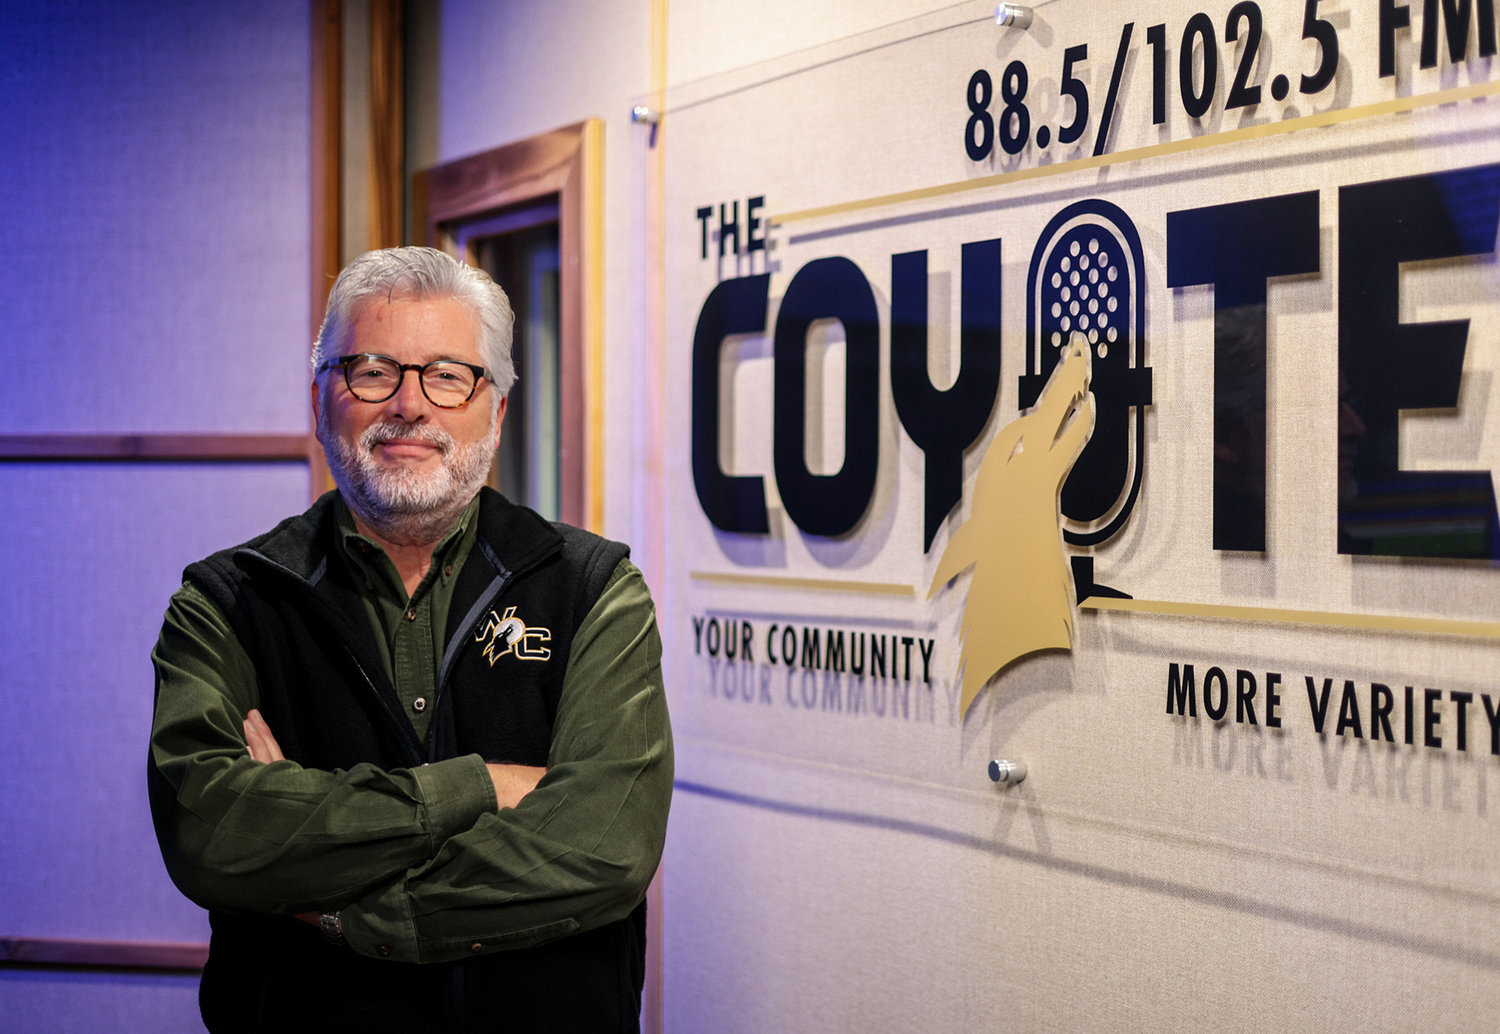 The Coyote's General Manager Dave Cowley brings years of experience to Weatherford College's new radio station.